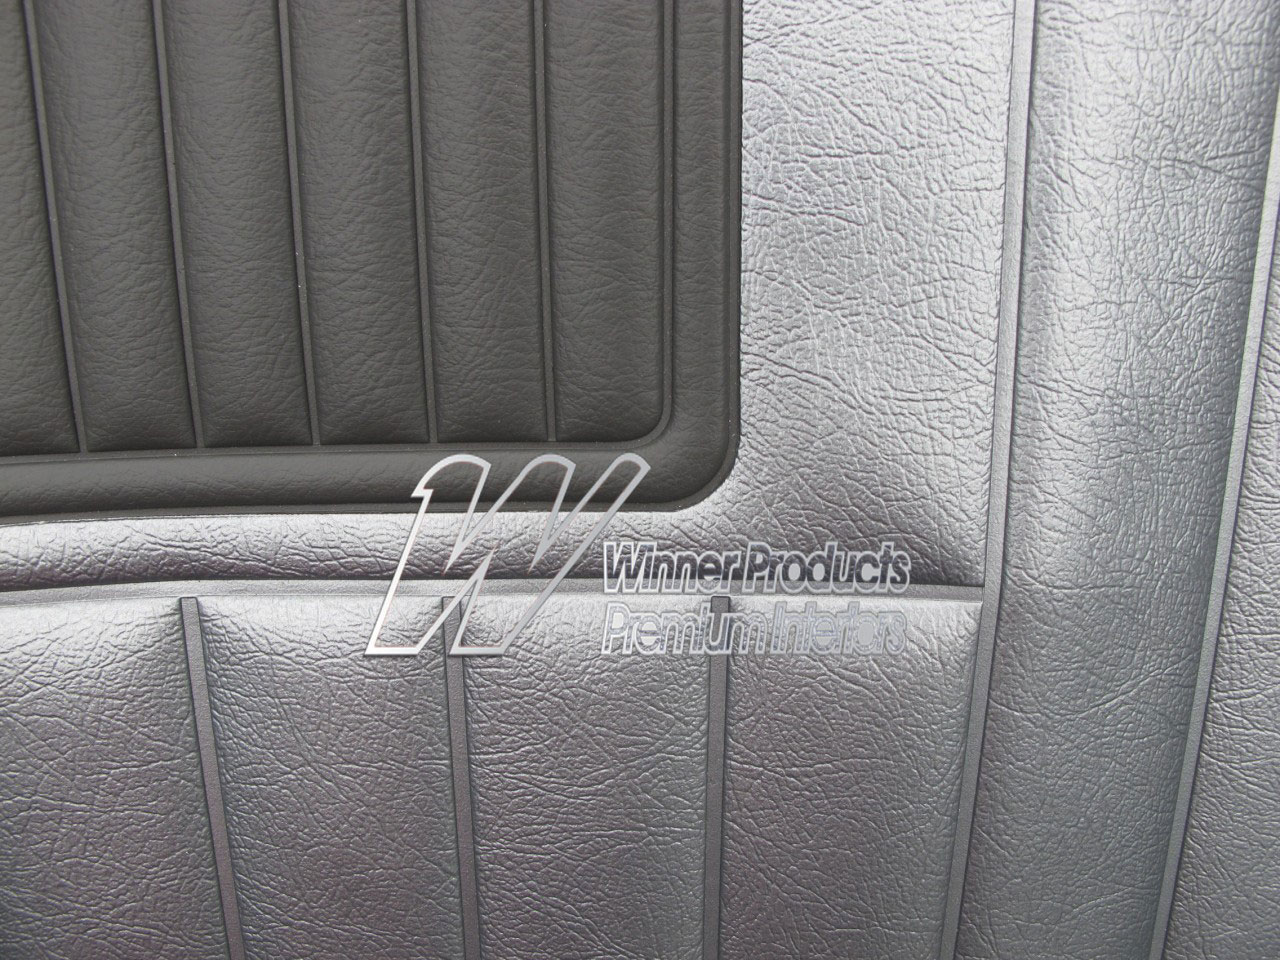 Holden Special EH Special Sedan C36 Alligator & Elephant Grey Seat Covers (Image 2 of 3)